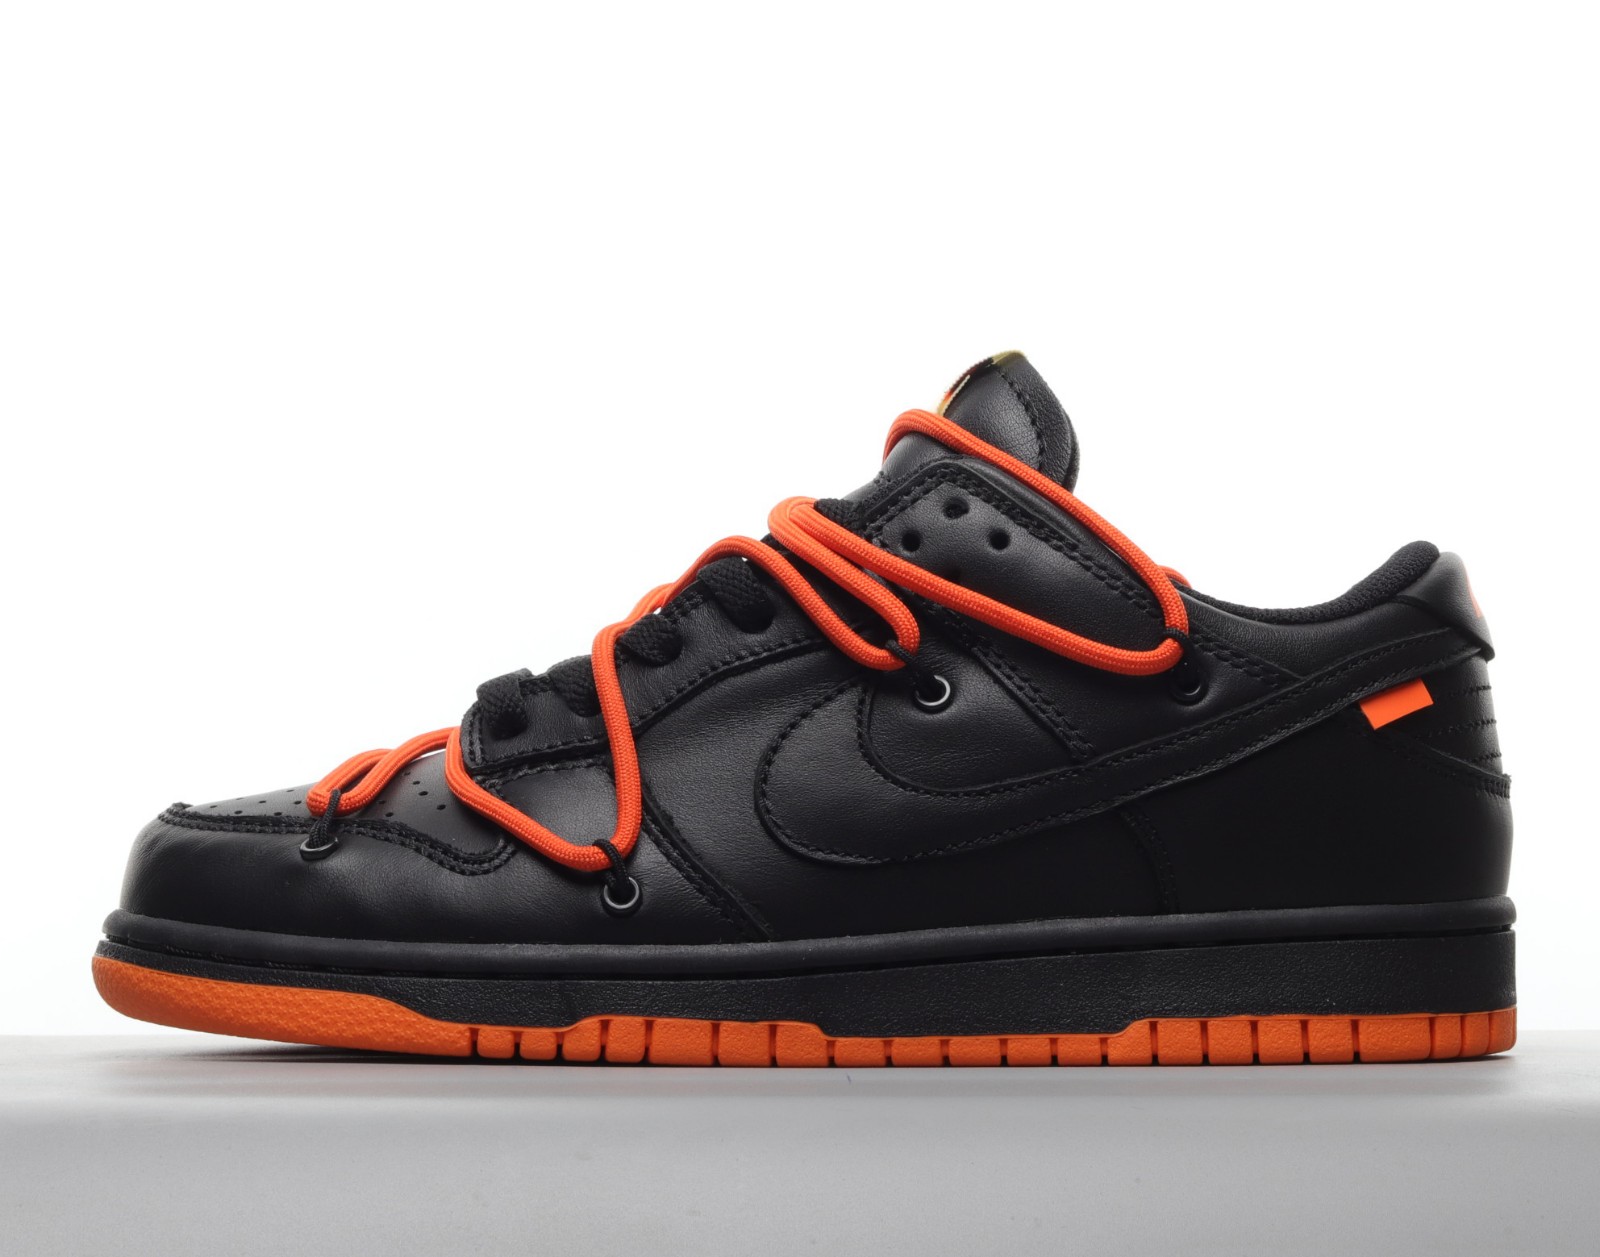 MultiscaleconsultingShops - OW FL x Nike SB Dunk Low Pro Black Total Orange CT0856 - air mags nike zoom high 005